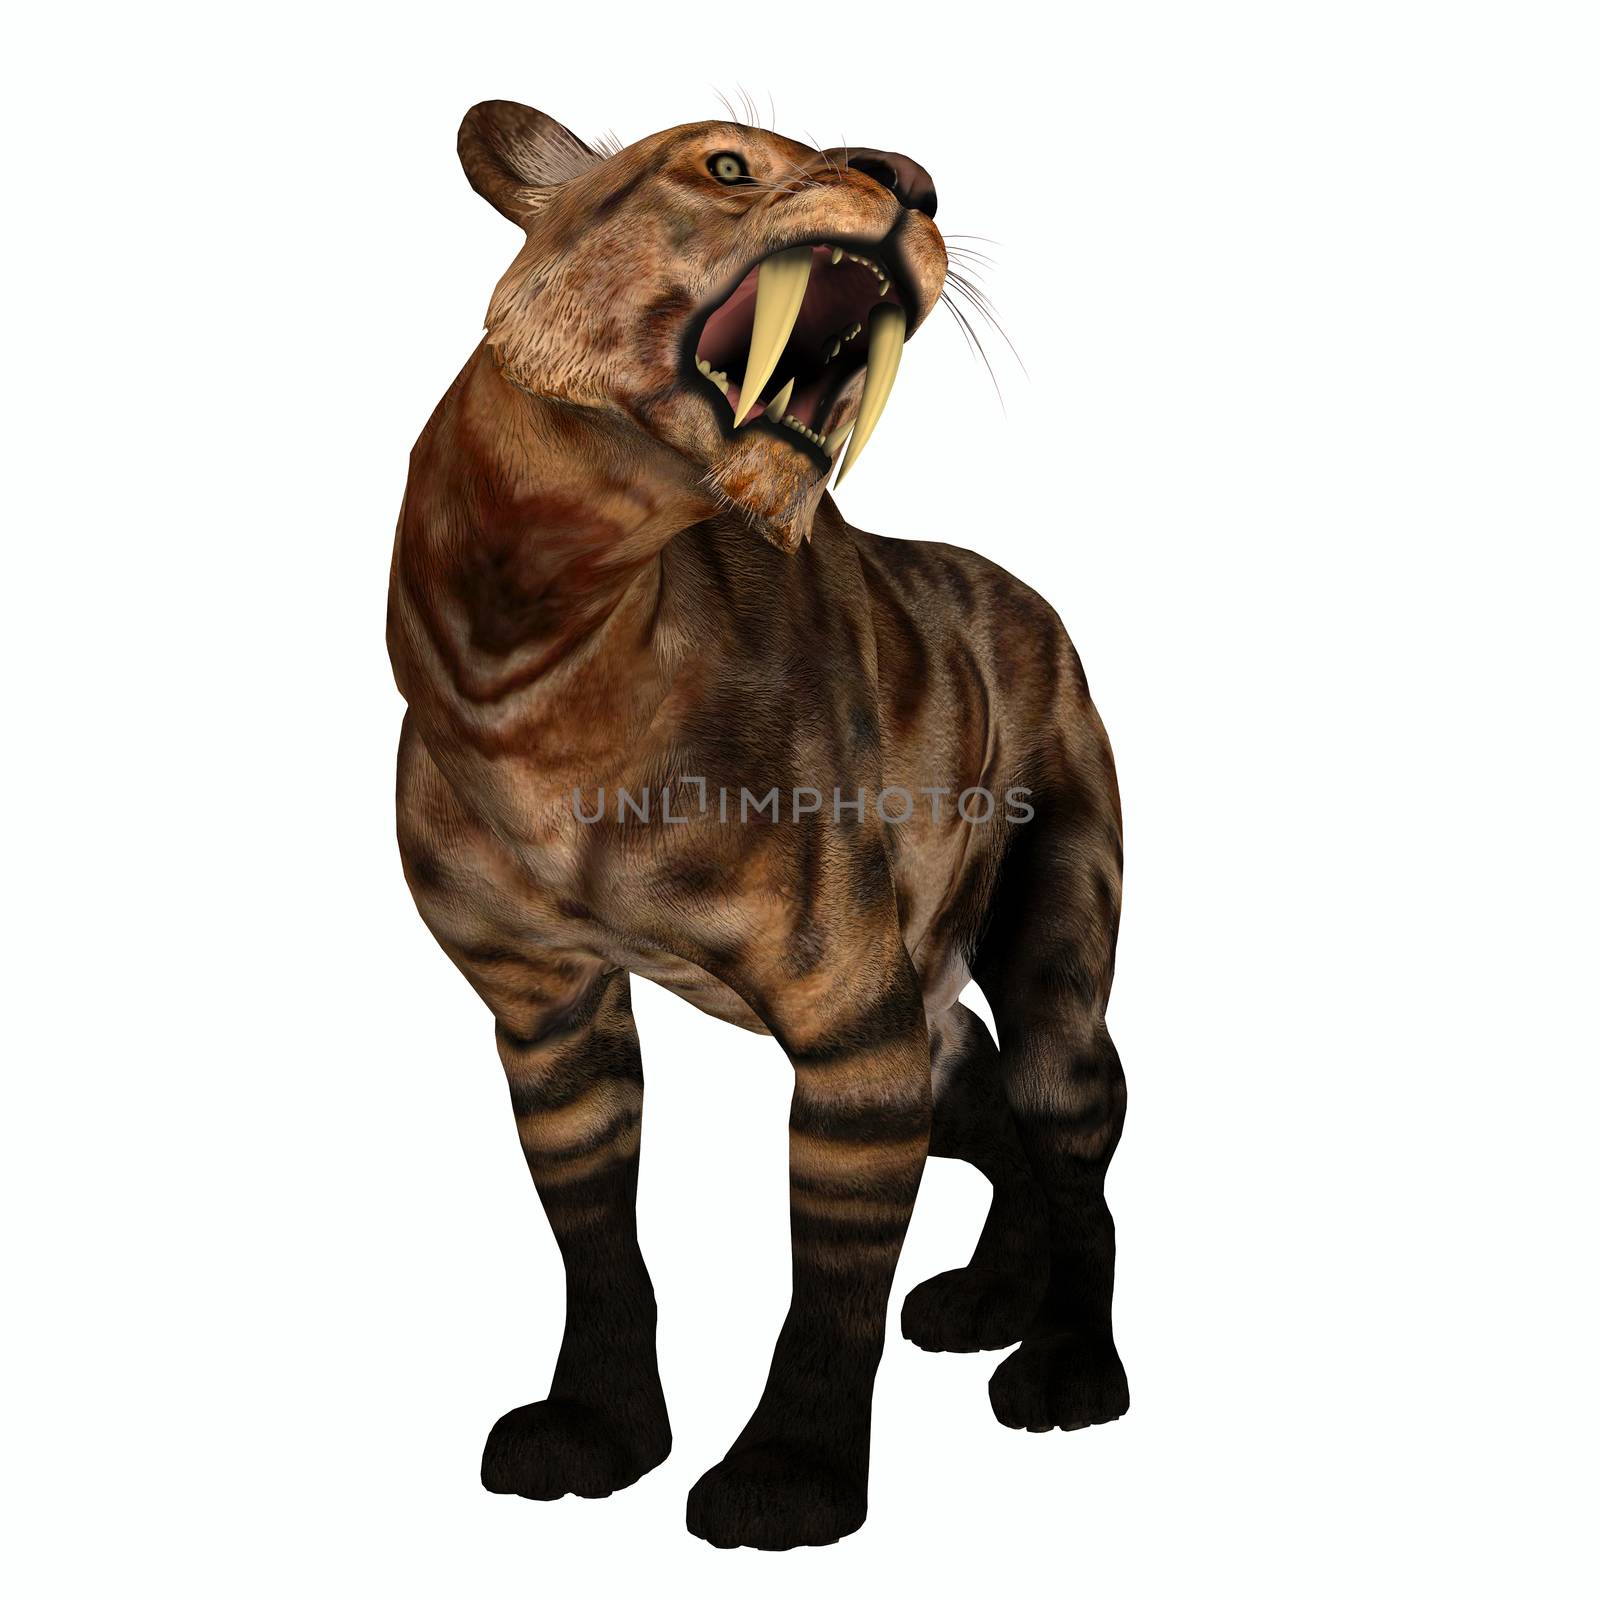 Saber-tooth Cat Growl by Catmando